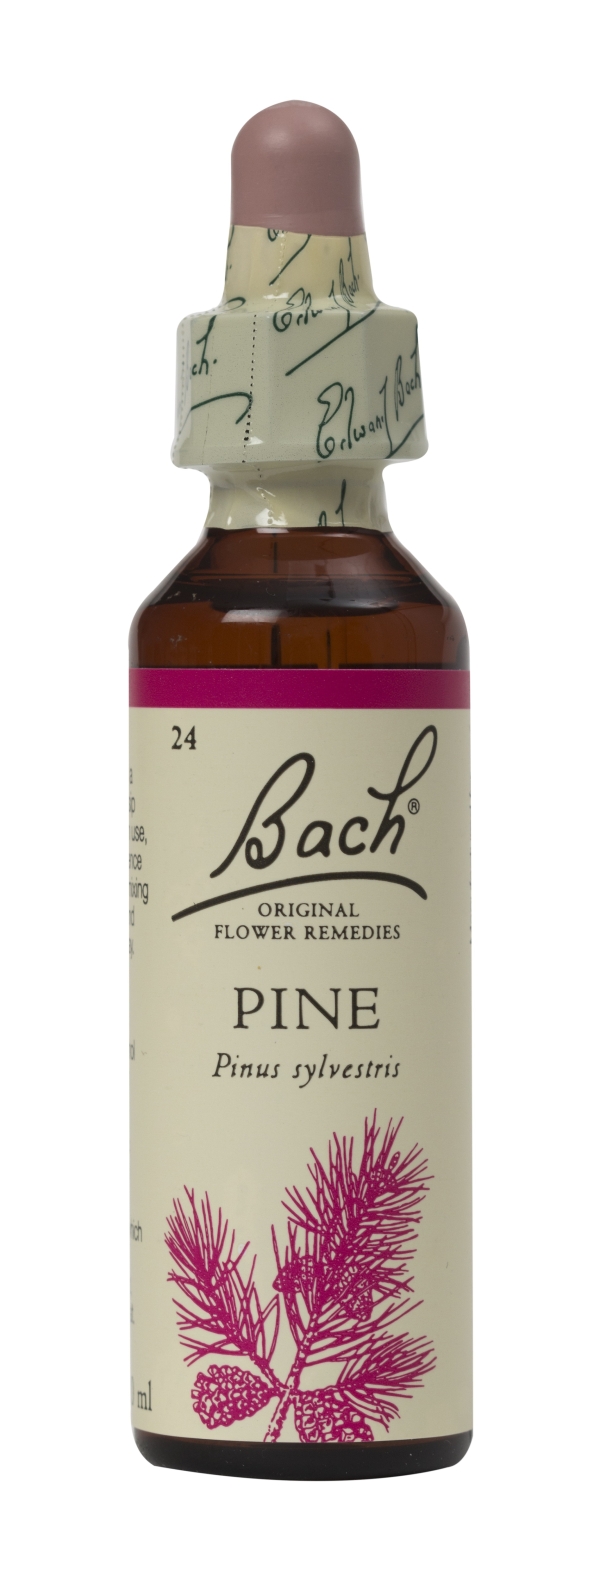 Nelson Bach Flower Remedies: Bach Pine Flower Remedy (20ml) available online here